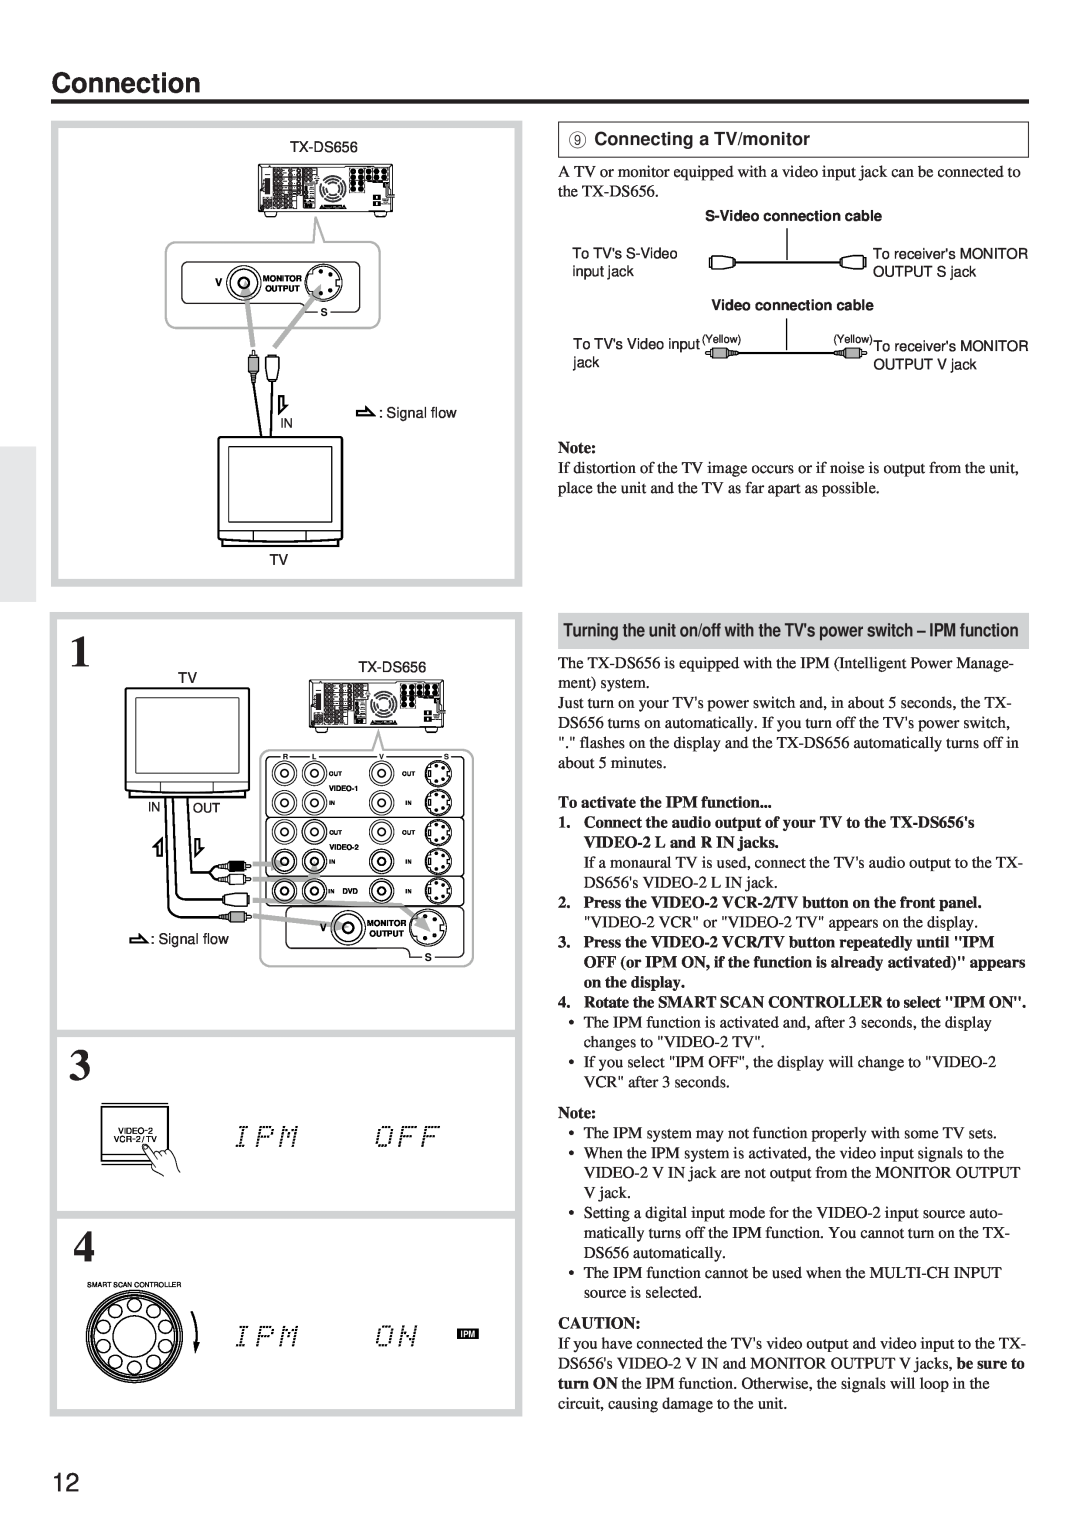 Onkyo TX-DS656 instruction manual Connection, 9Connecting a TV/monitor 